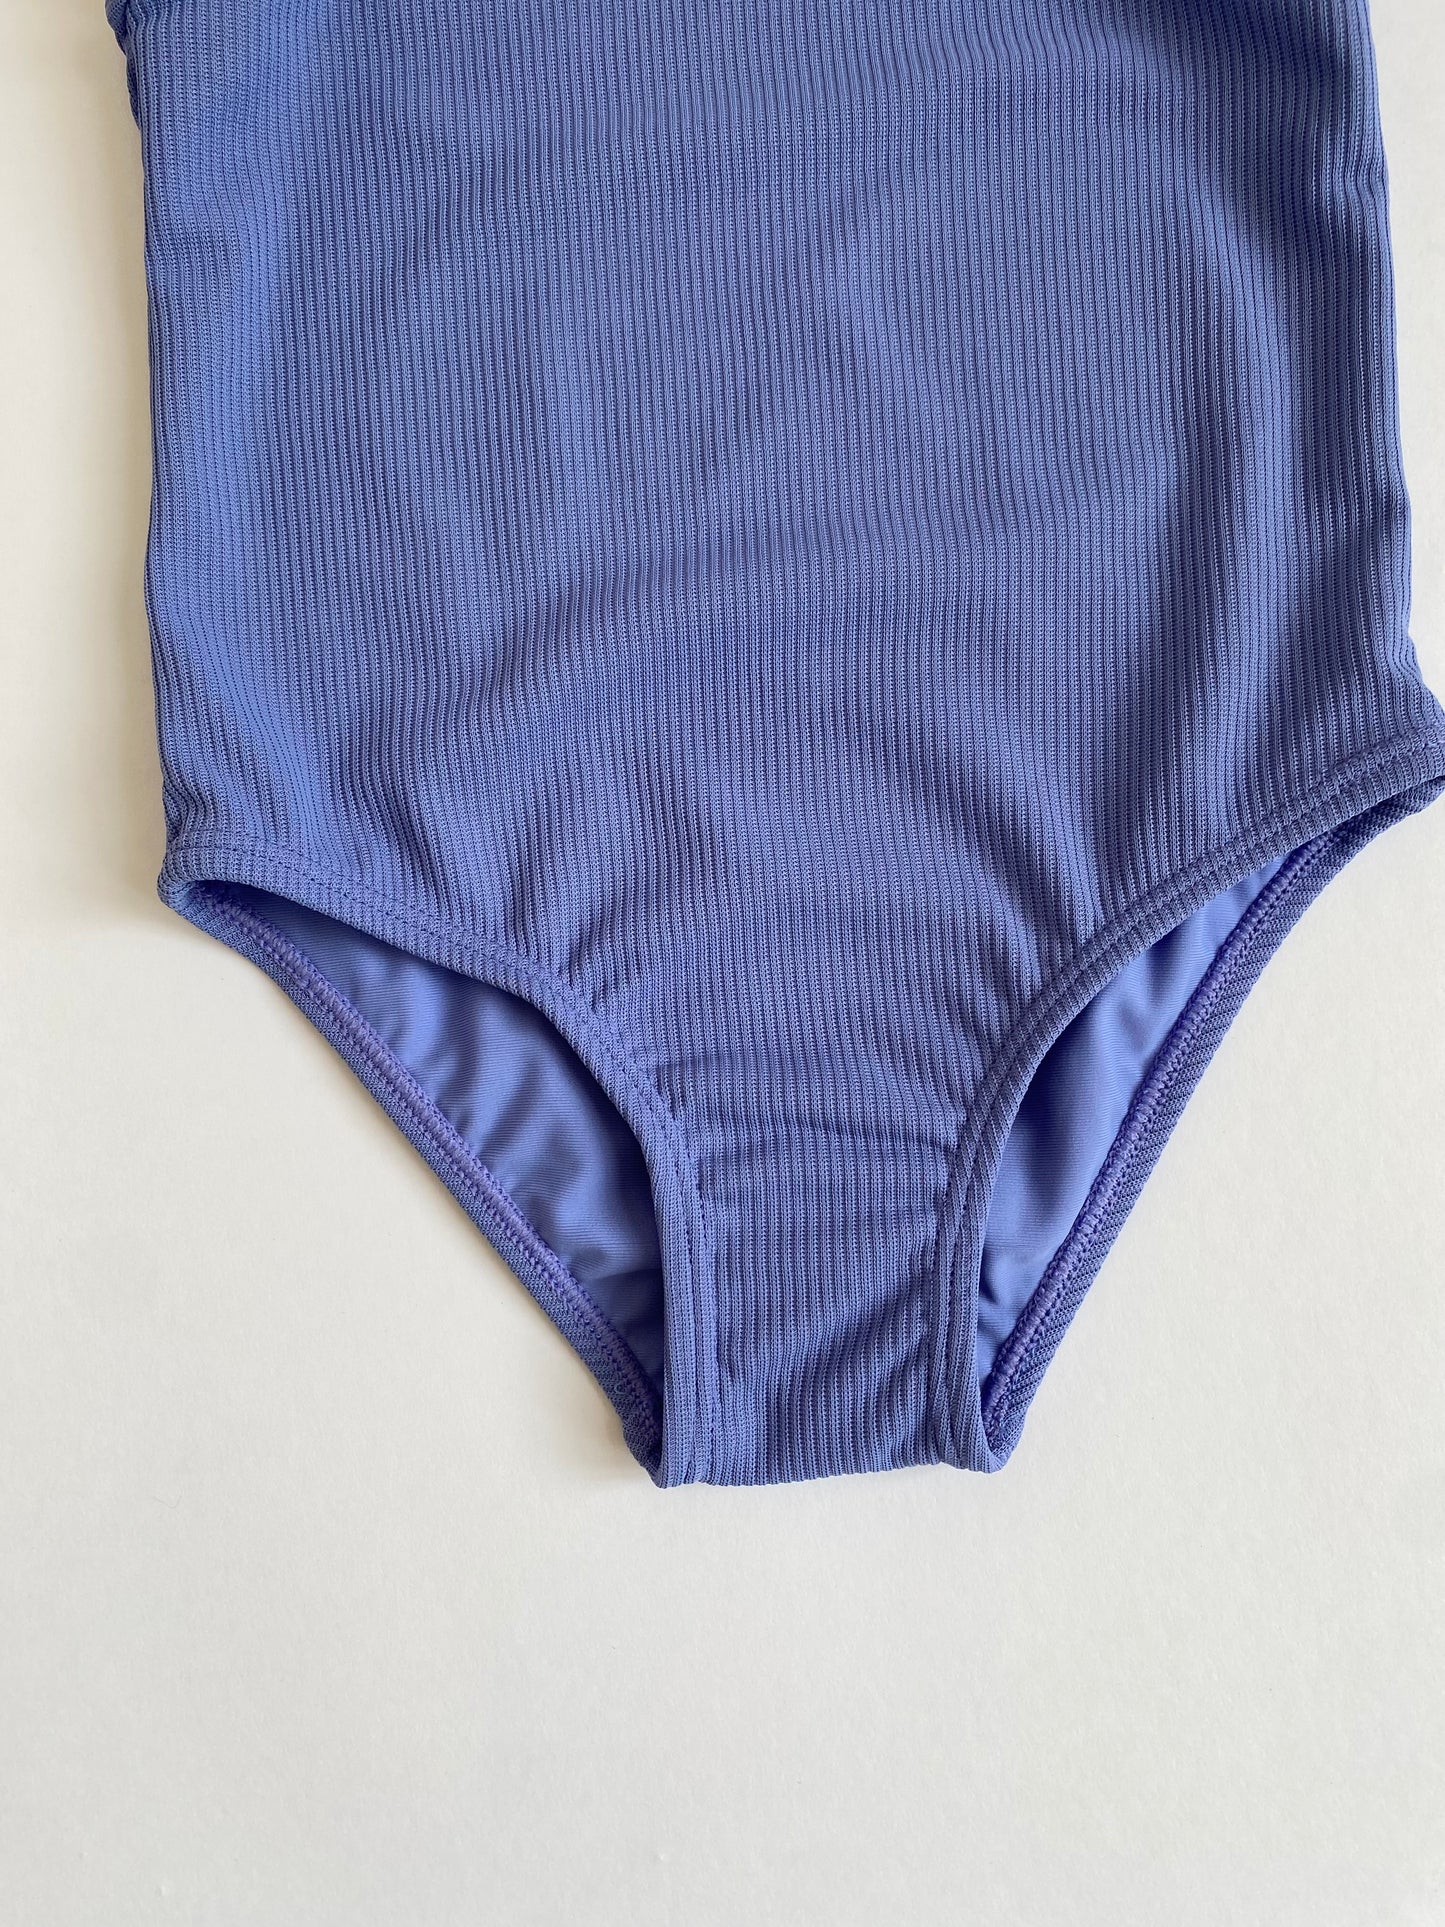 Arizona Ribbed One Piece In Blue Violet